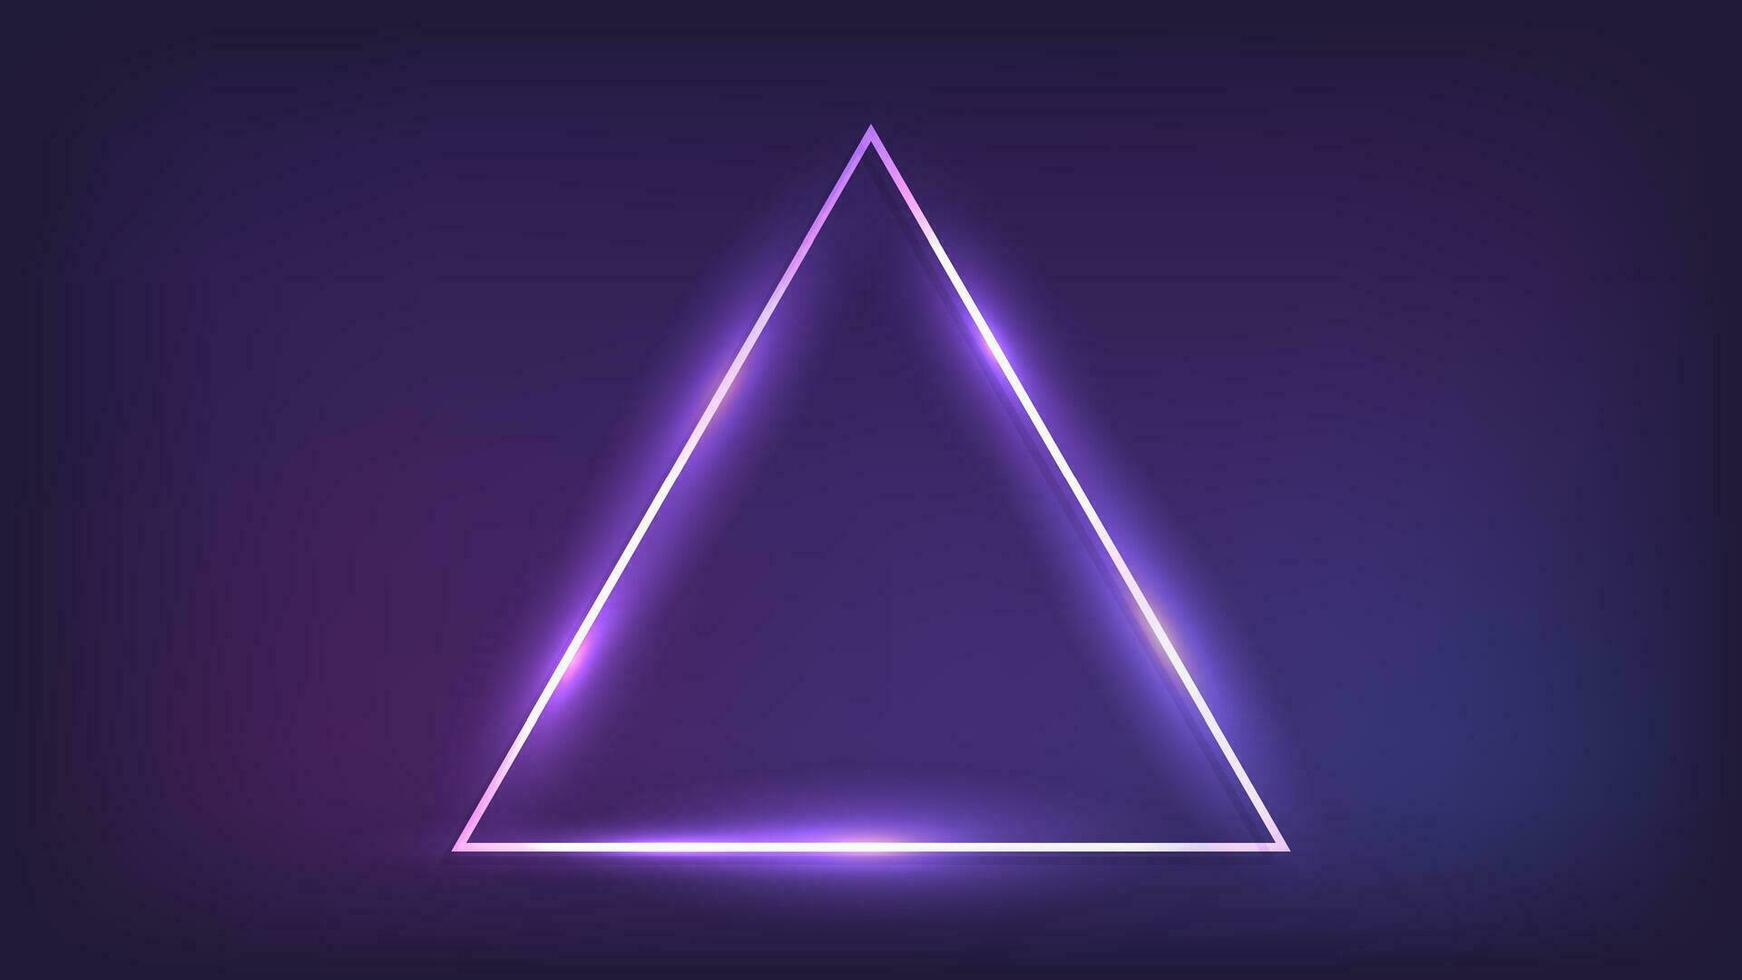 Neon triangle frame with shining effects on dark background. Empty glowing techno backdrop. Vector illustration.